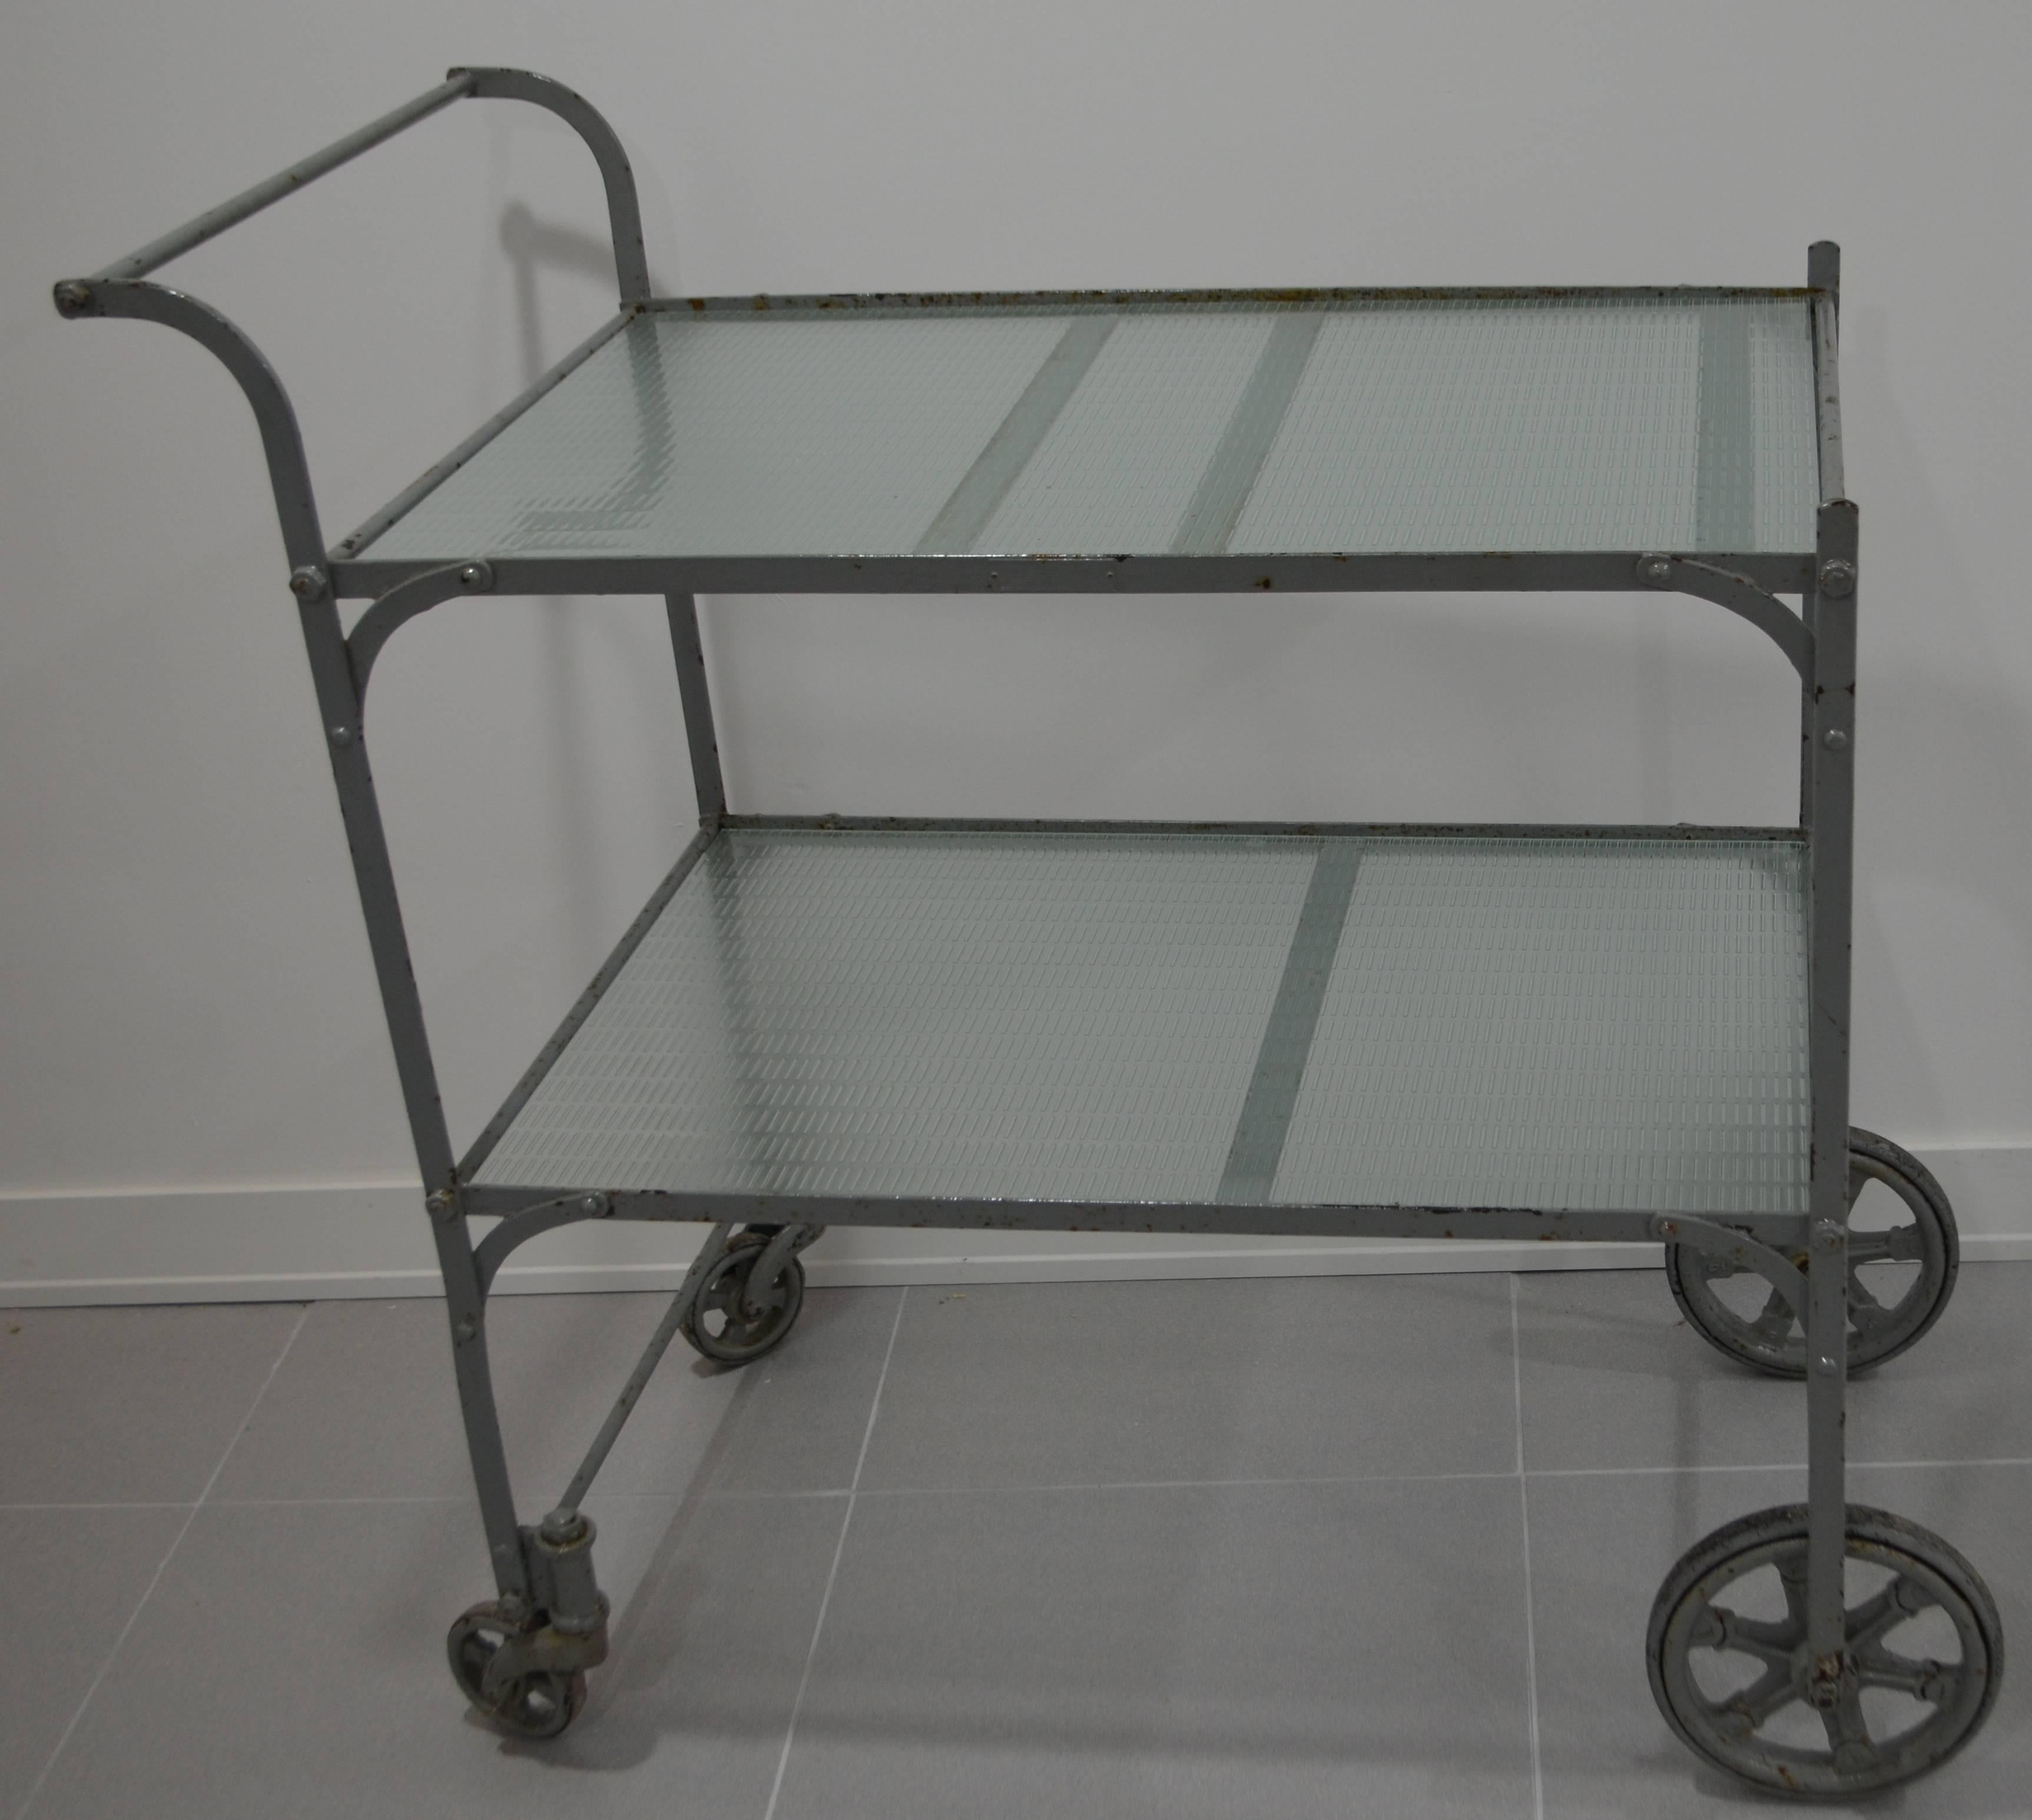 Tea cart with painted steel frame and two shelves of rippled glass top. Rear wheels pivot nicely for easy maneuverability. Love those early baby carriage wheels. Great for plants. Funky Downtown.